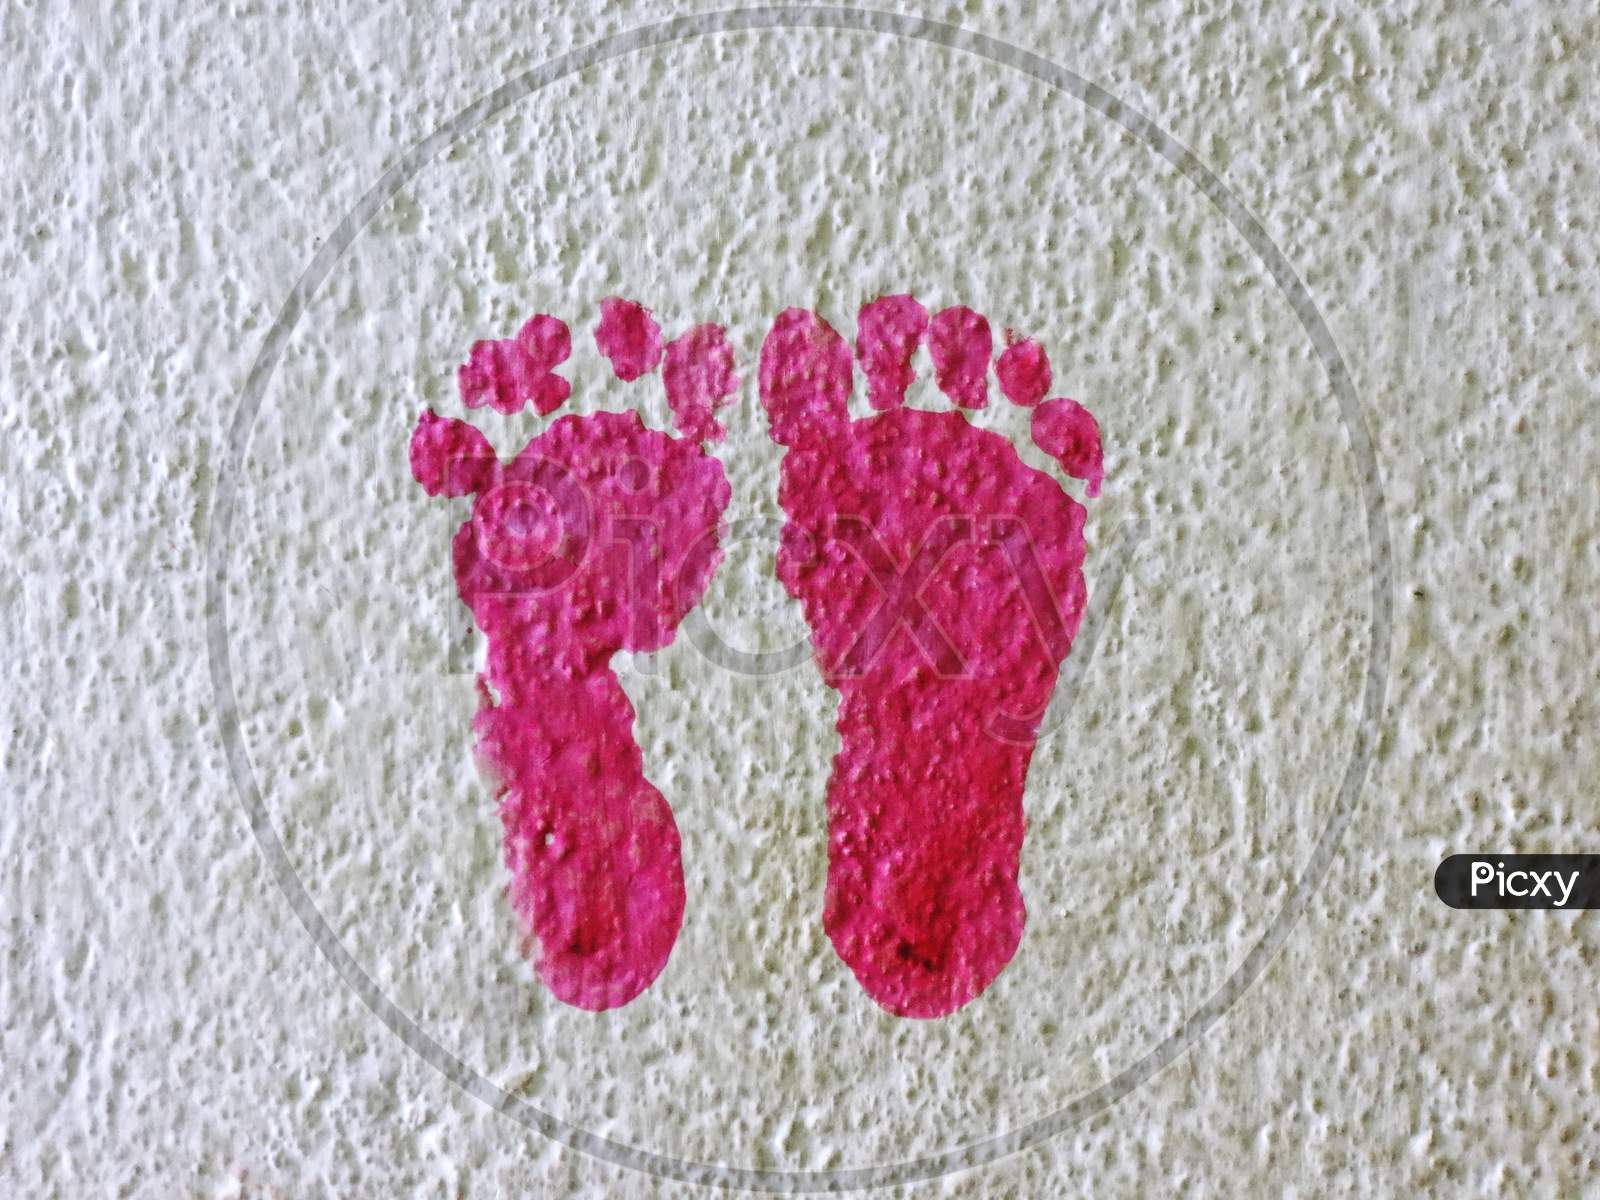 Knitting pink baby foot print on the wall